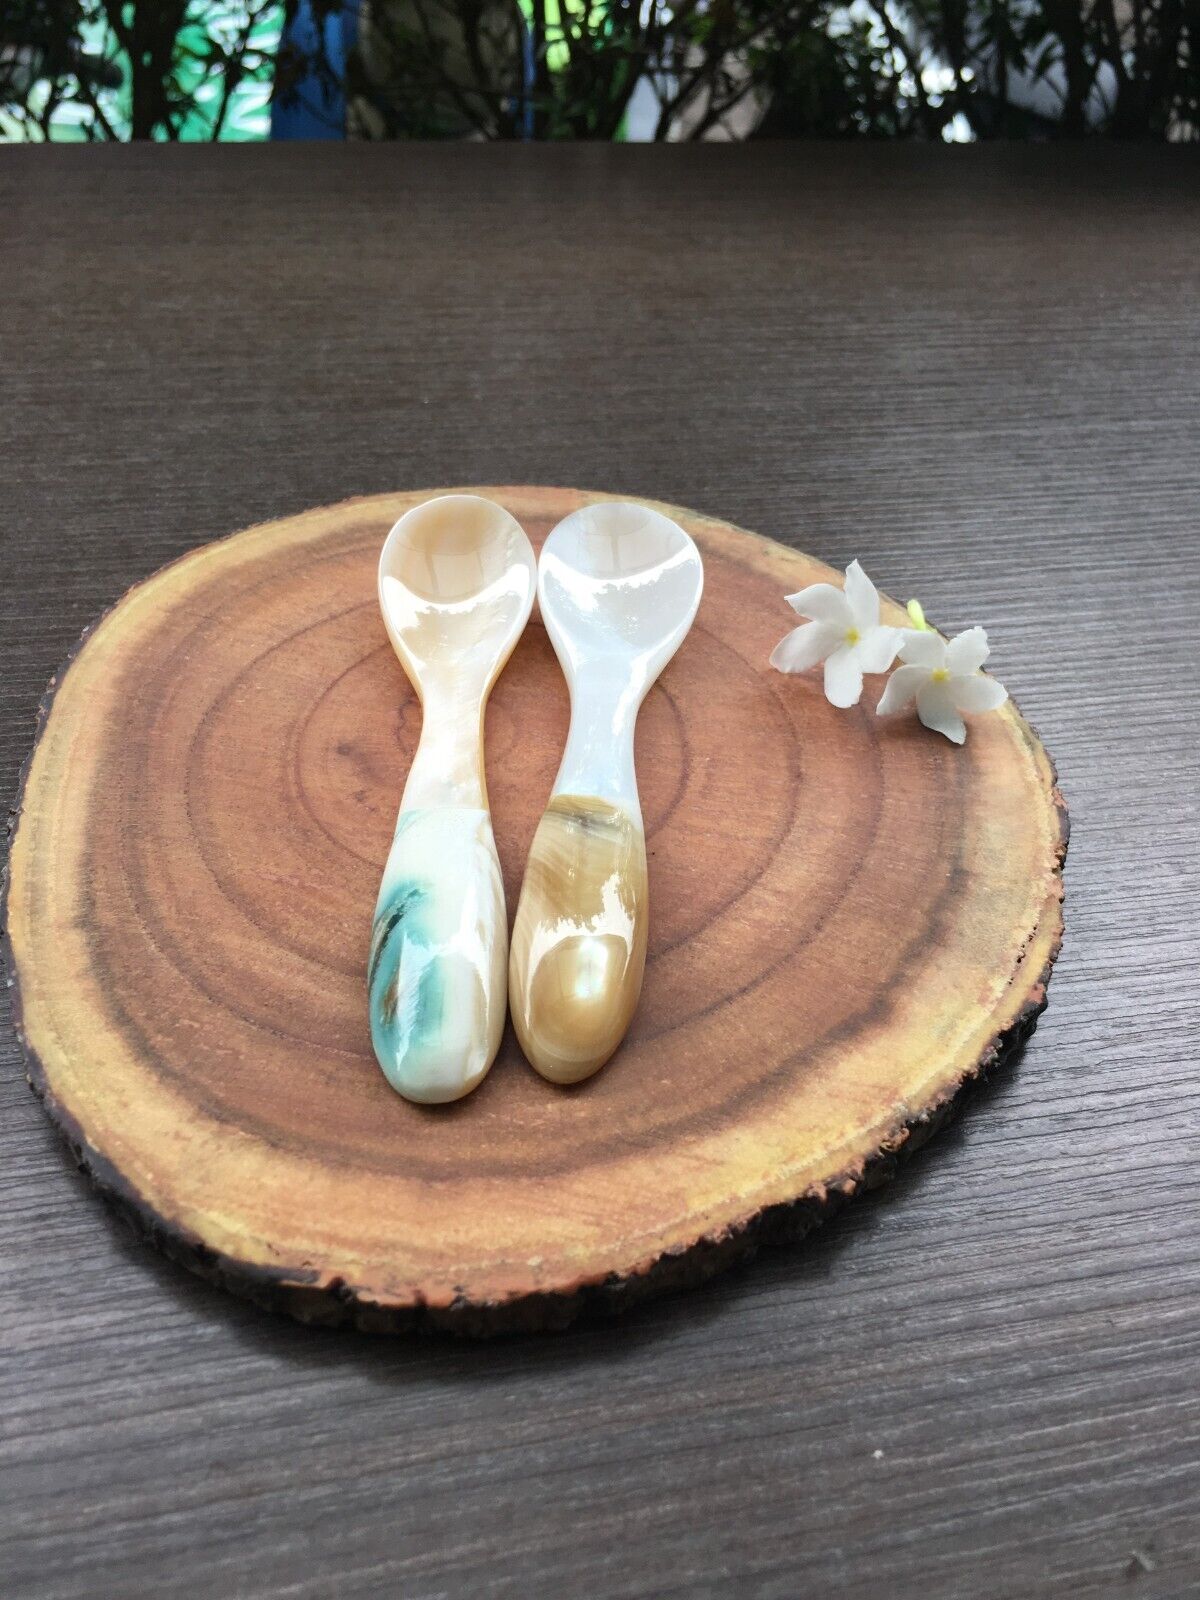 Premium handcrafted spoon, Caviar Spoon made of Nacre Shell. Size 10cm